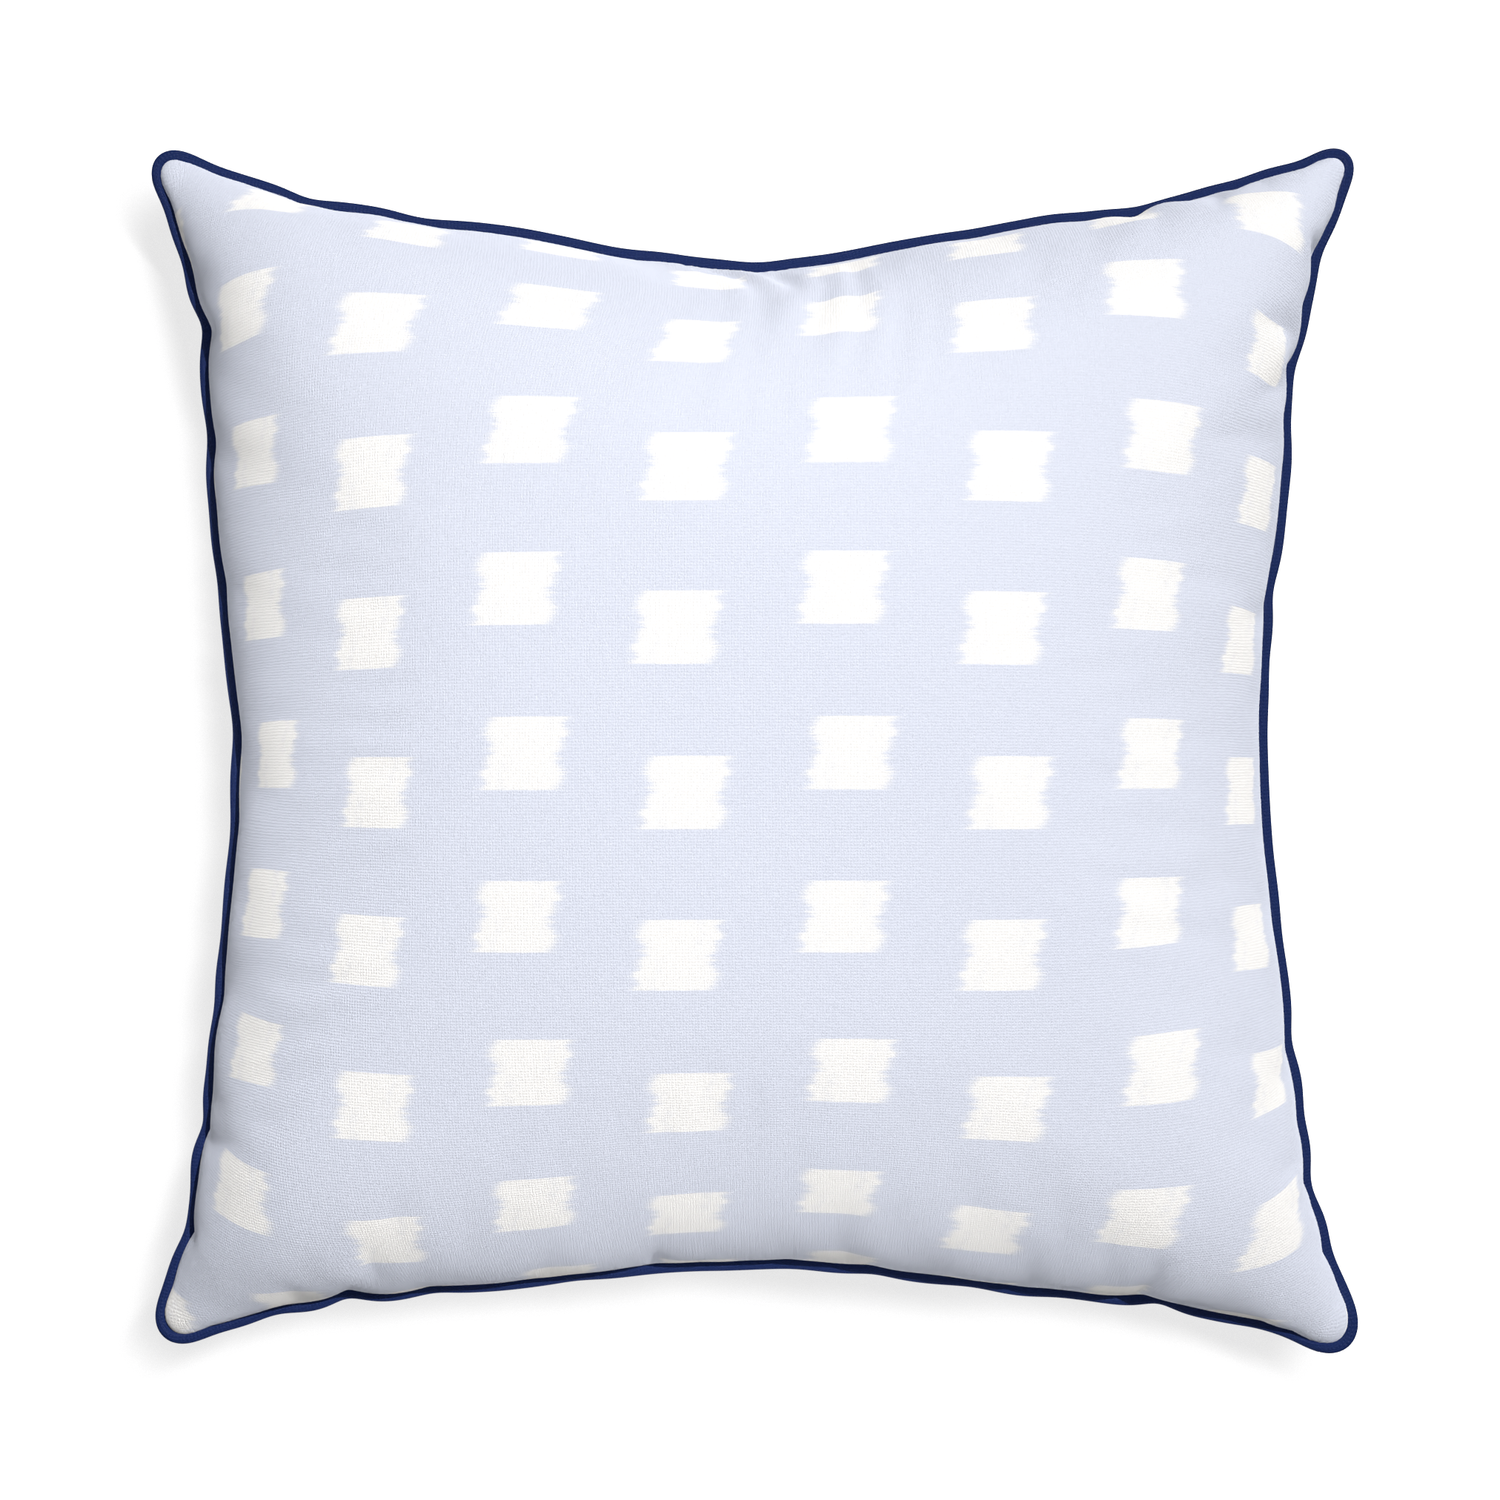 Euro-sham denton custom sky blue patternpillow with midnight piping on white background